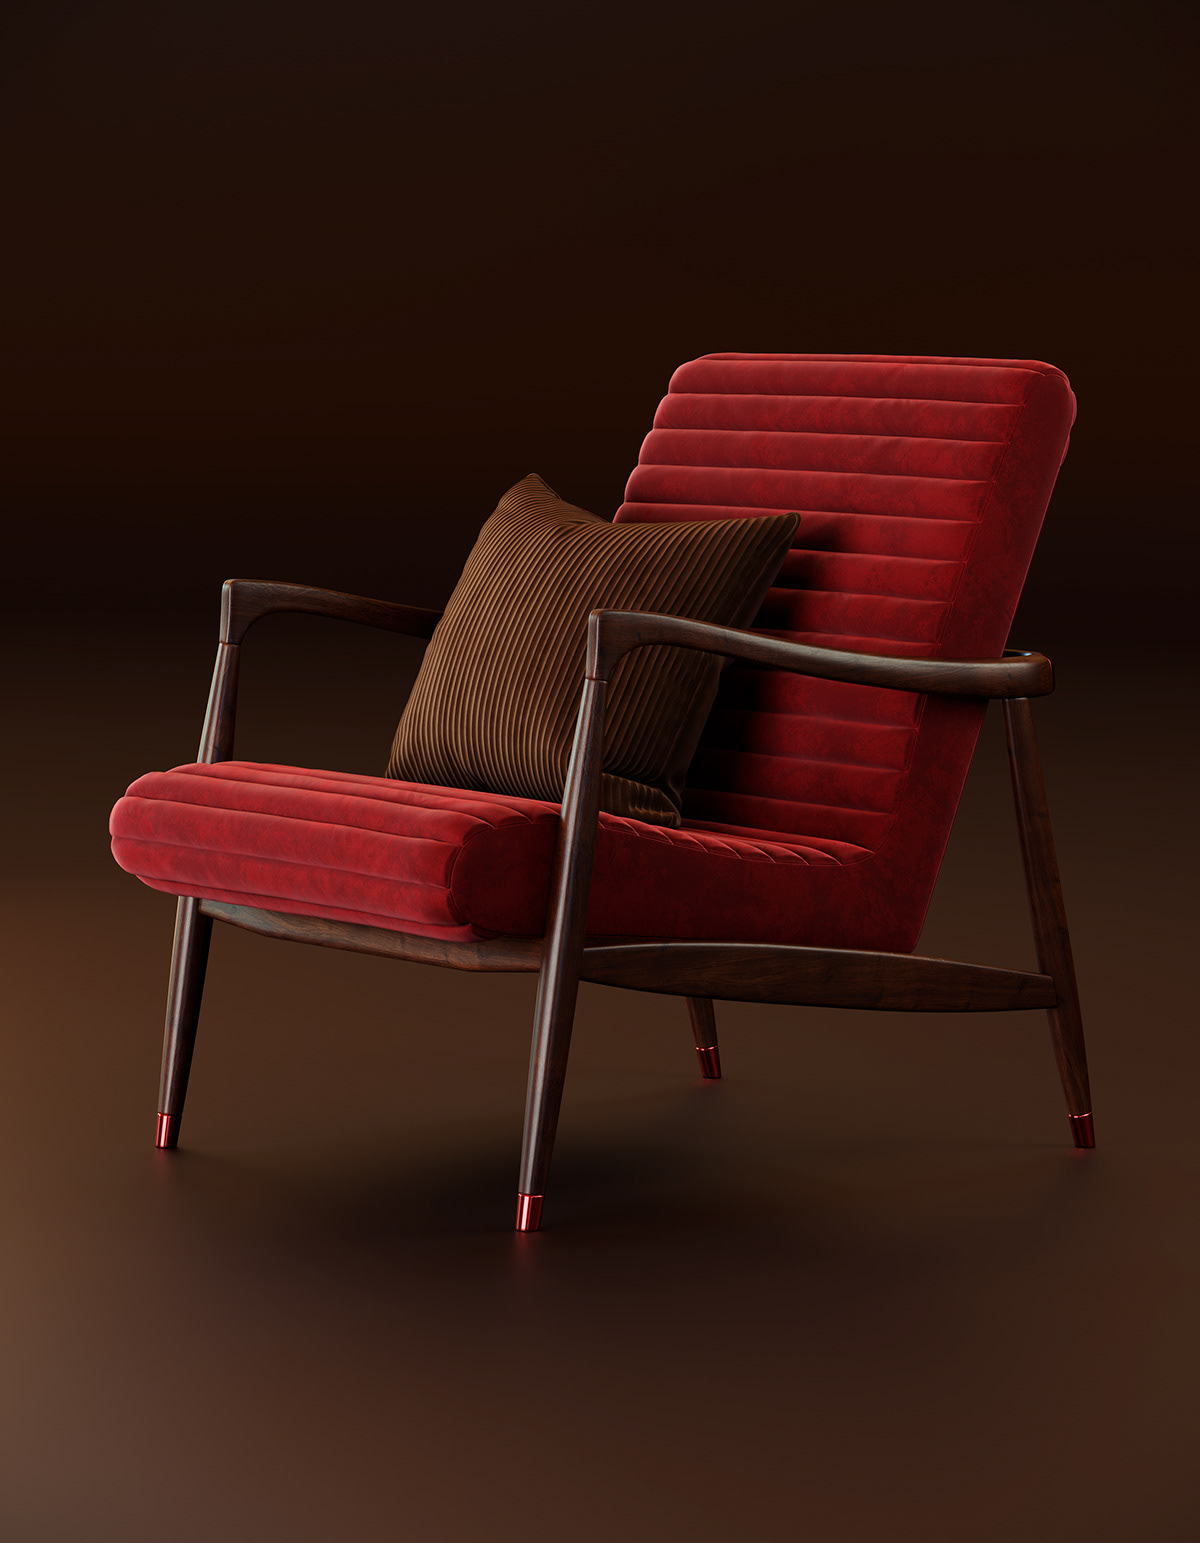 3d max 3D Visualization chairs corona render  Interior marvelous product render